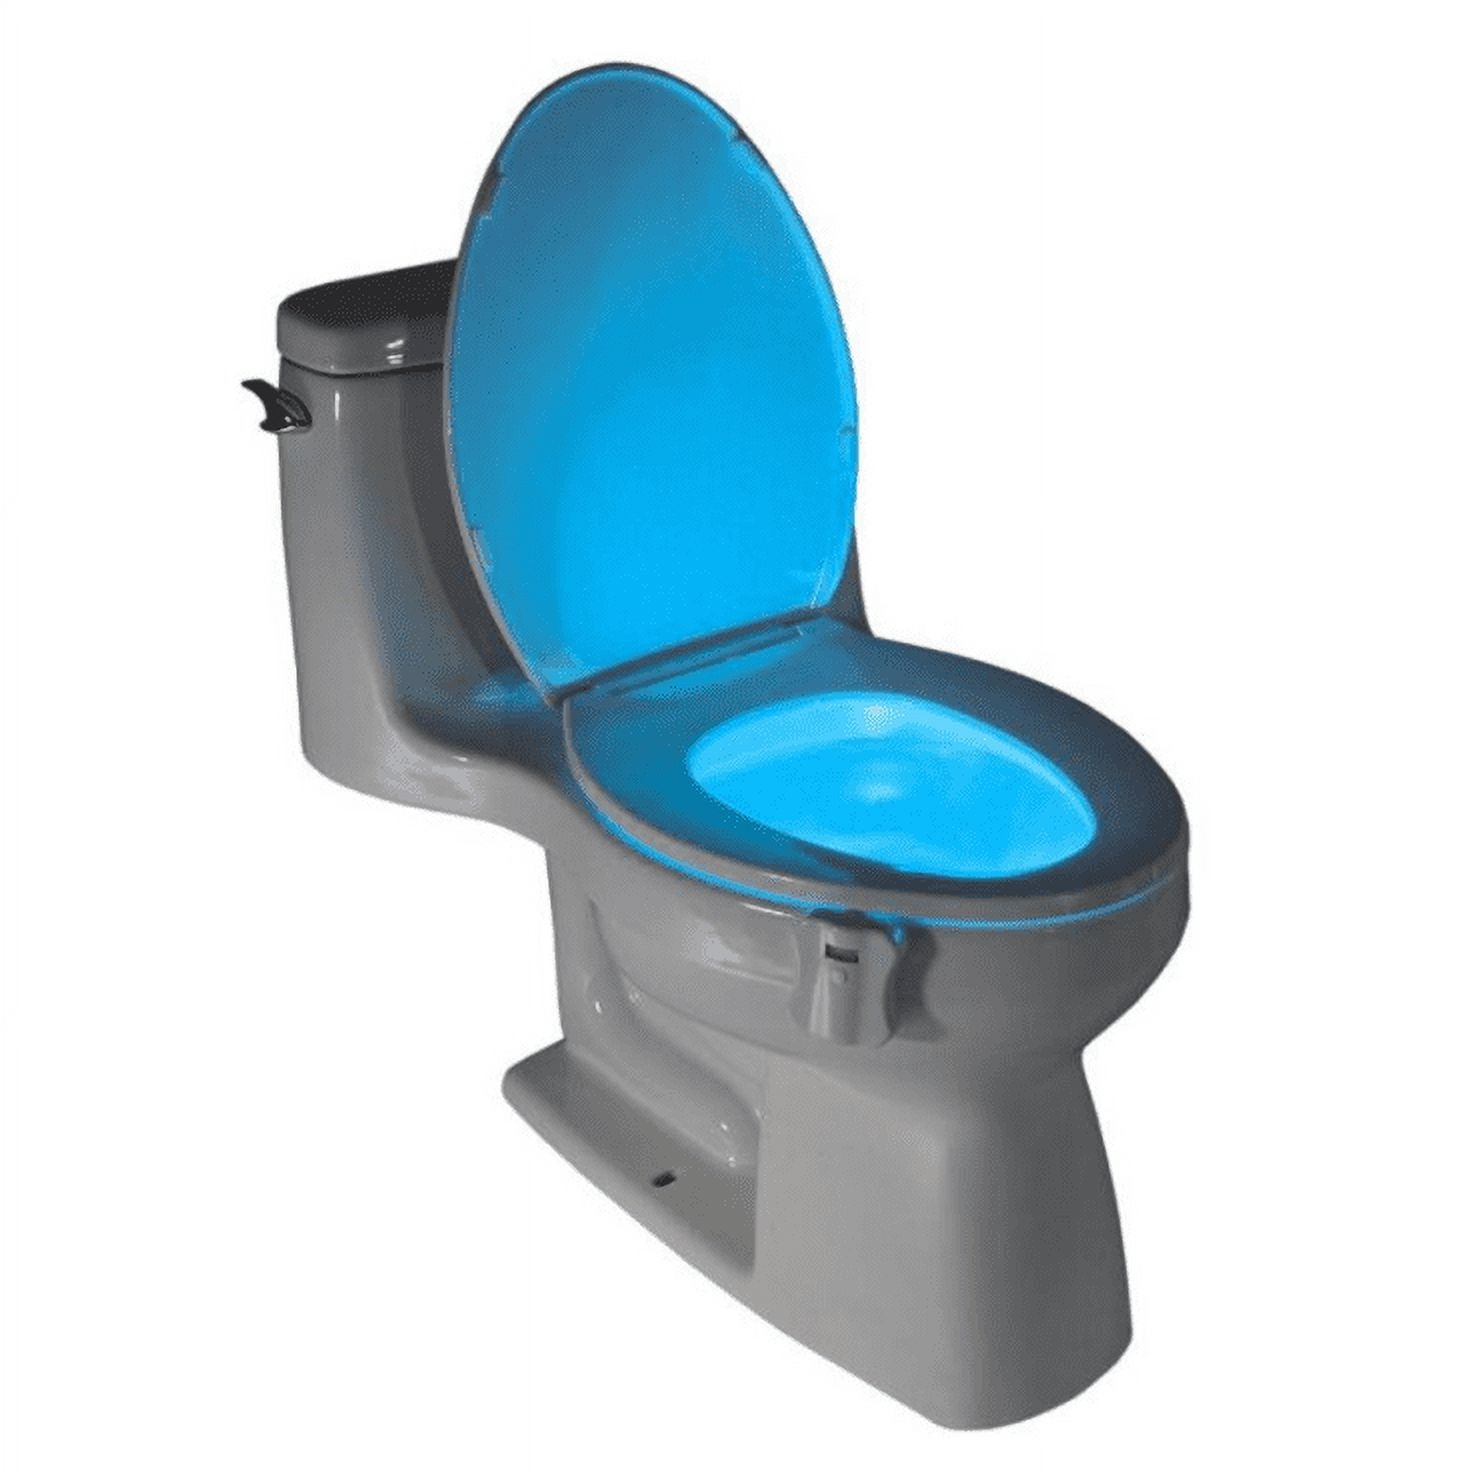 JacobsParts Bathroom Night Light Toilet Bowl Lamp 8 Color LED Light and  Motion Sensor Activated